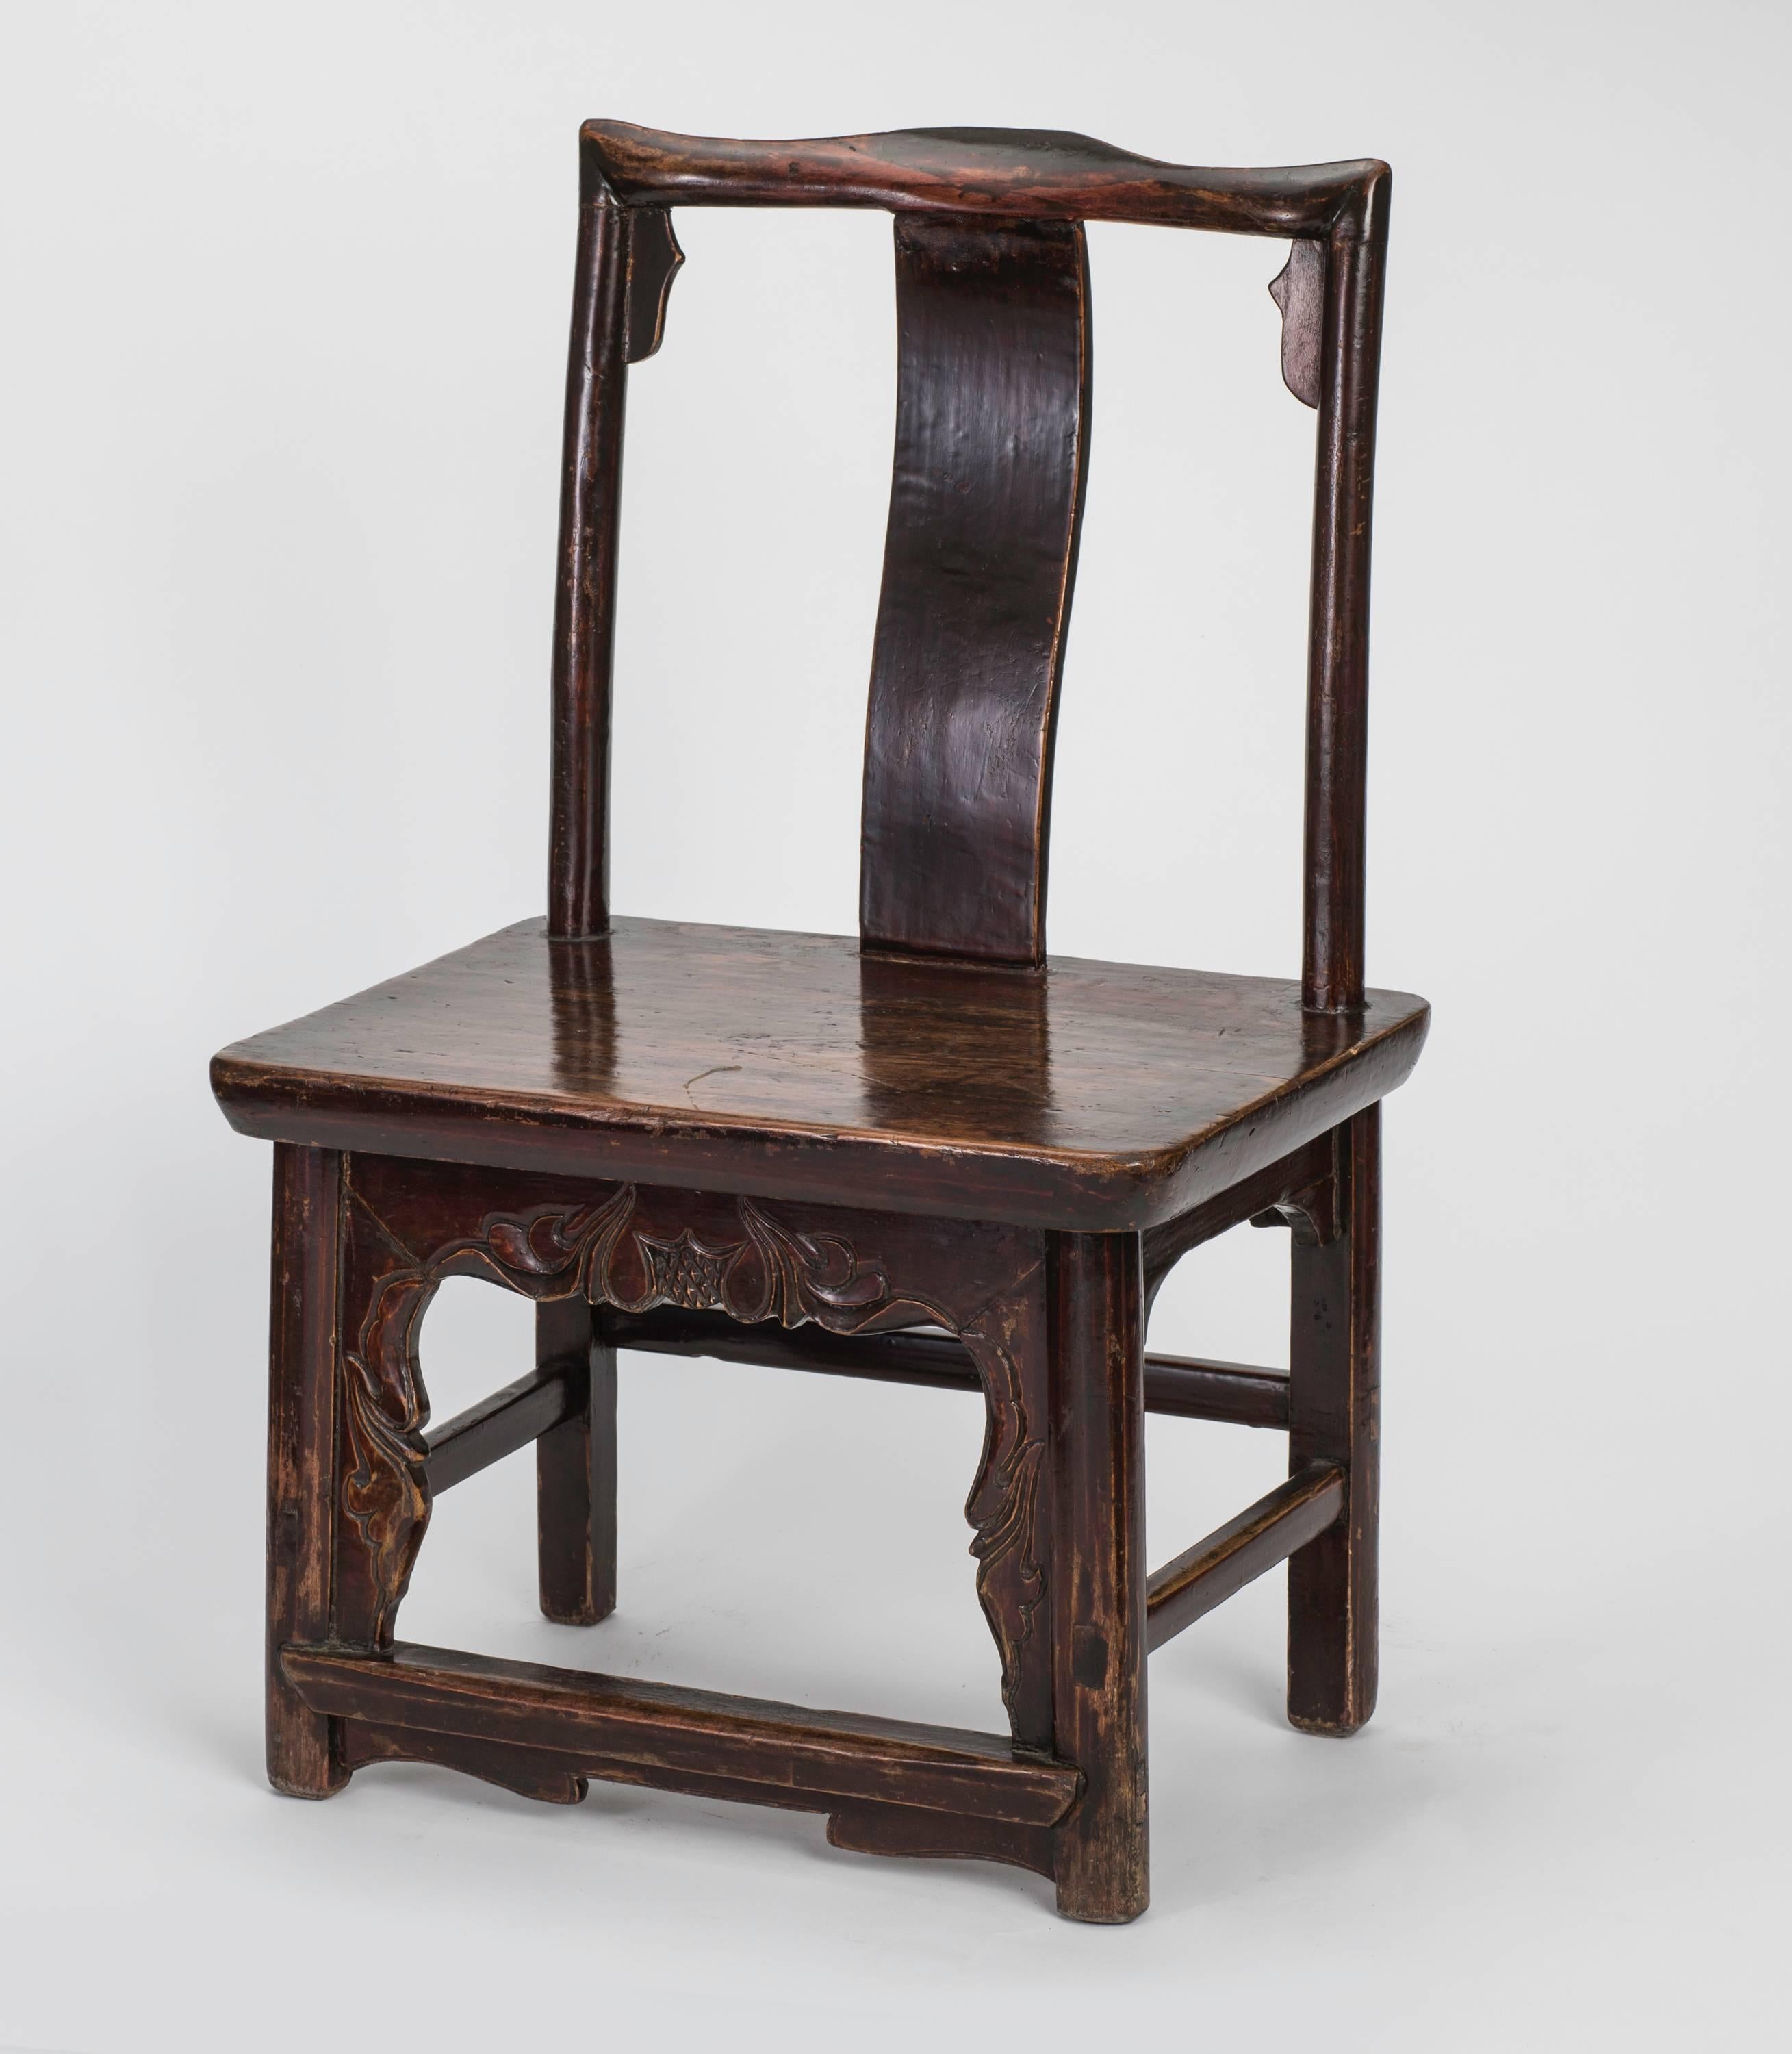 Small rosewood bride's chair or child's chair, circa 1930s. From the days in China when young girls were arranged for marriage, these chairs were made for potential child bride. Beautifully handcrafted with square shoulder and sturdy seat. A